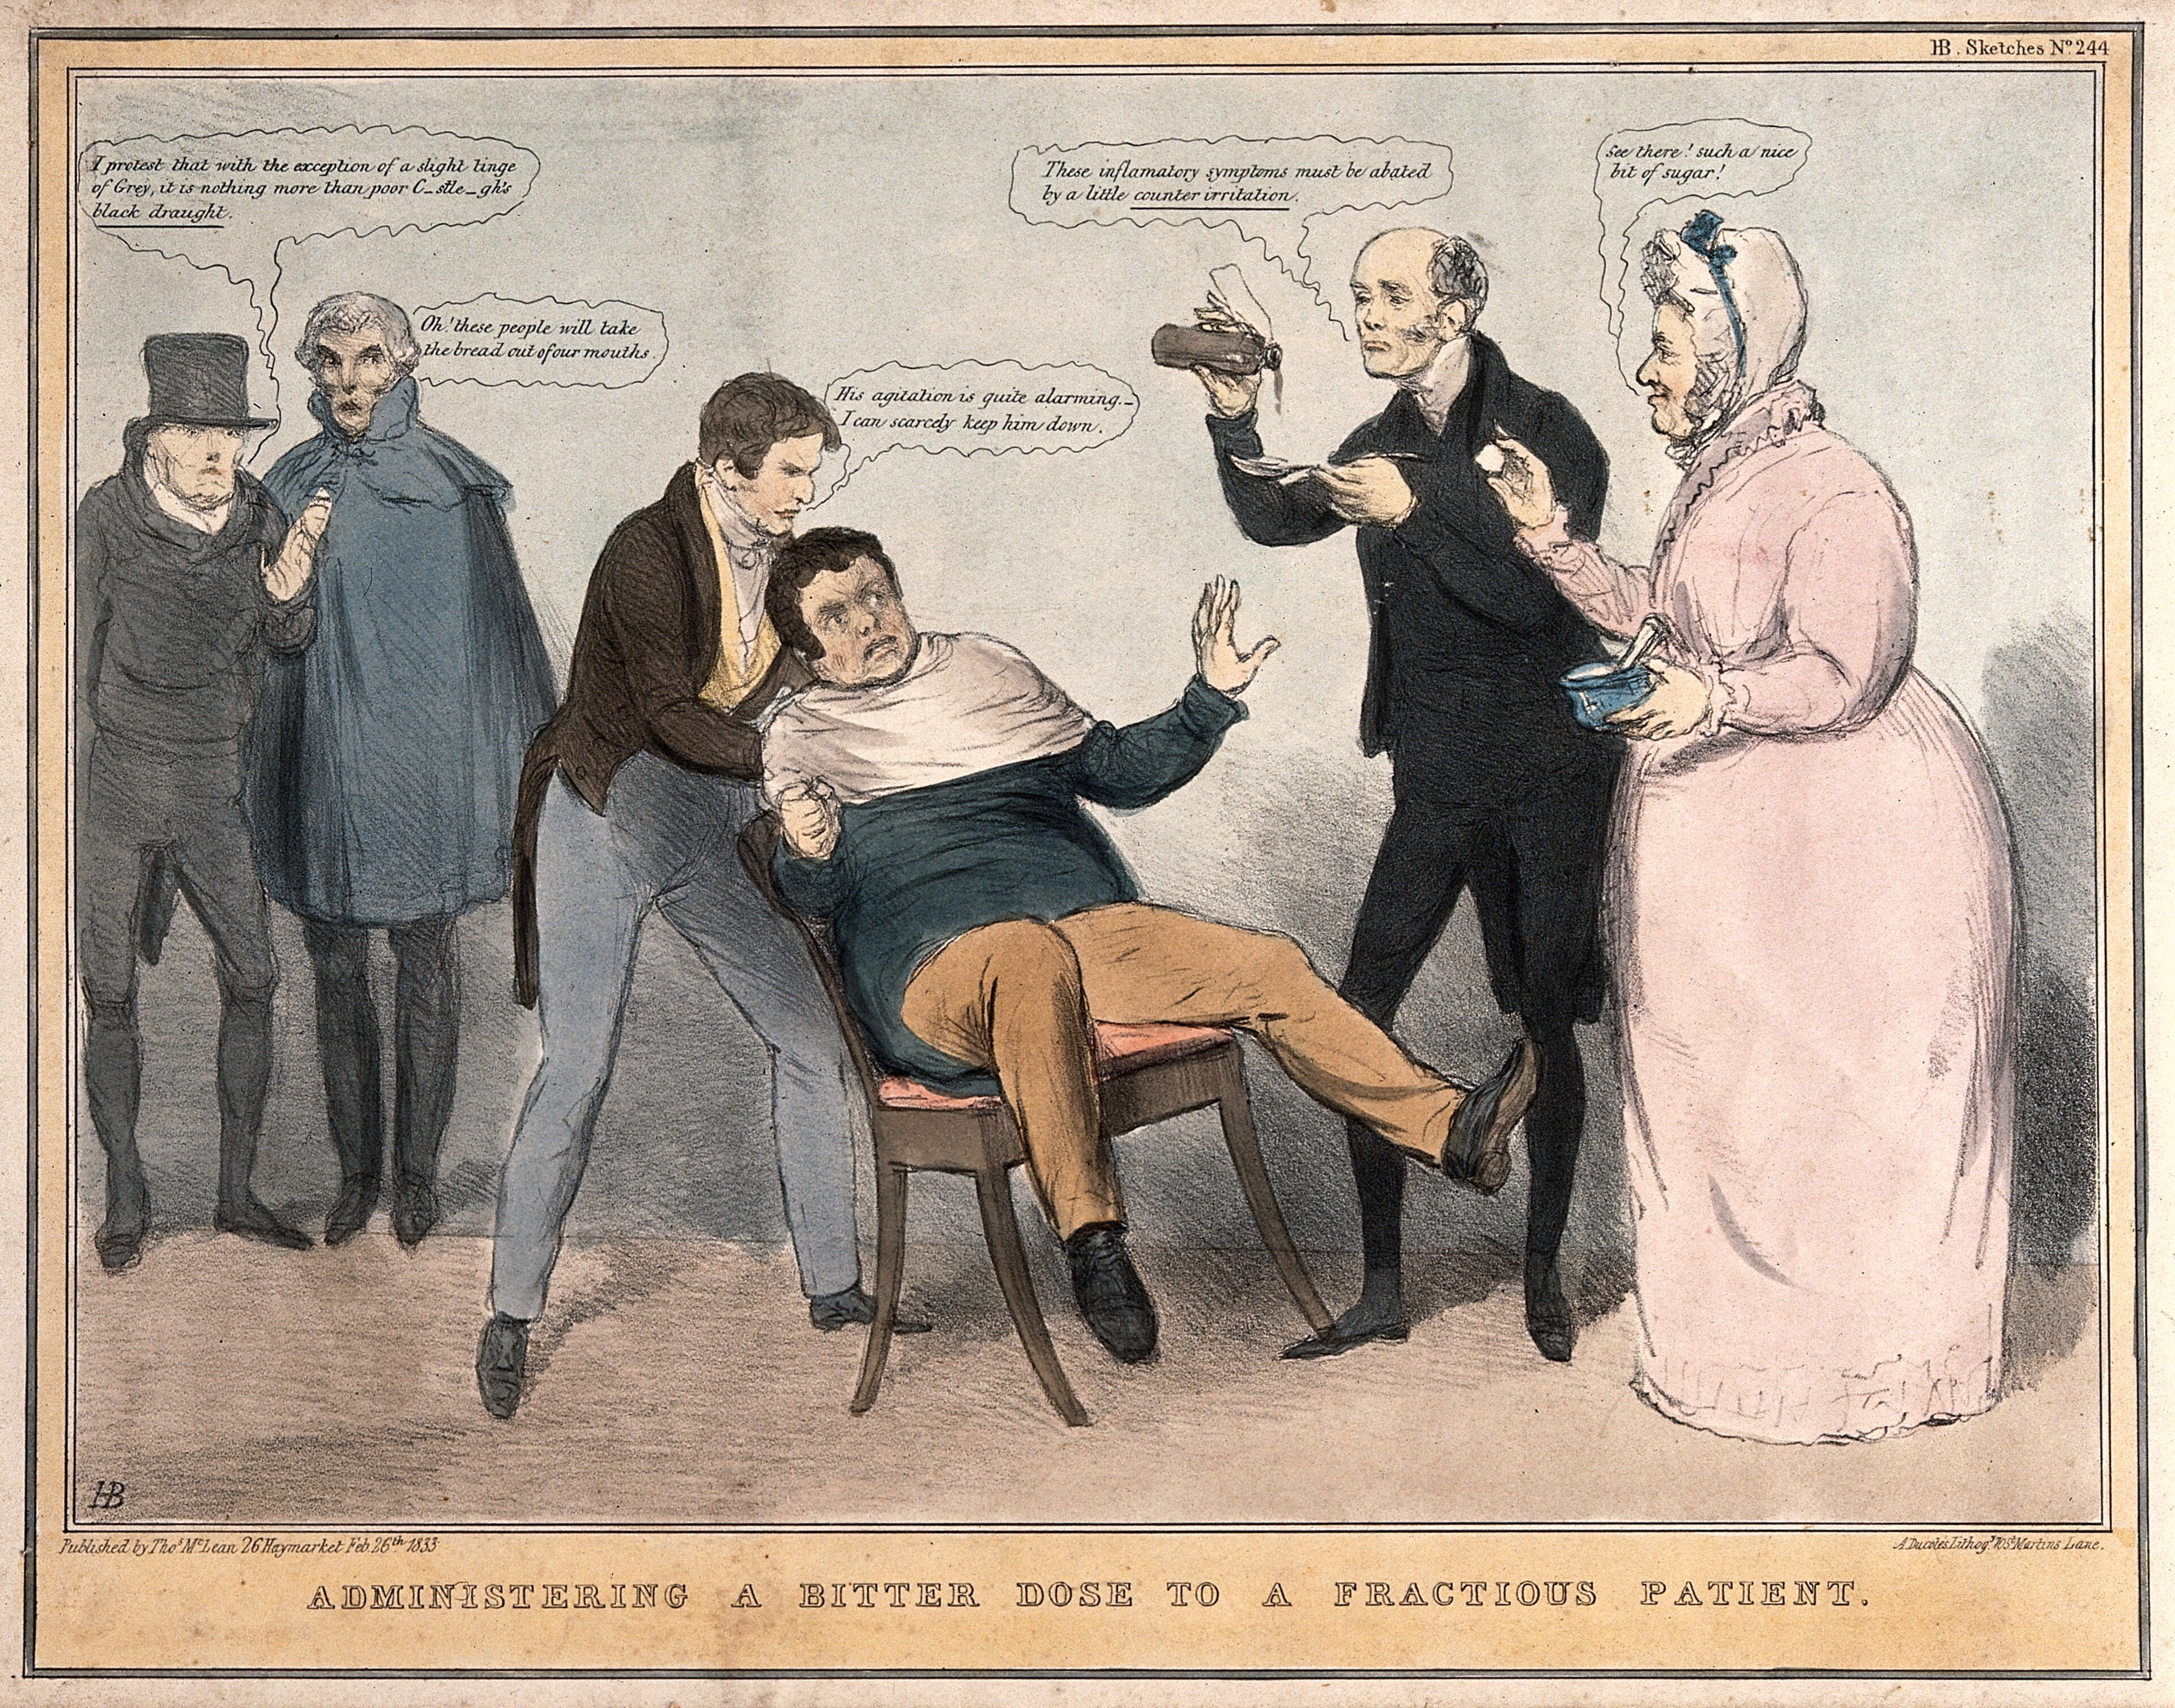 A man being restrained in a chair while a doctor and nurse prepare to give him some medicine; referring to English politicians' feelings towards Daniel O'Connell. Coloured lithograph by J. Doyle, 1833.